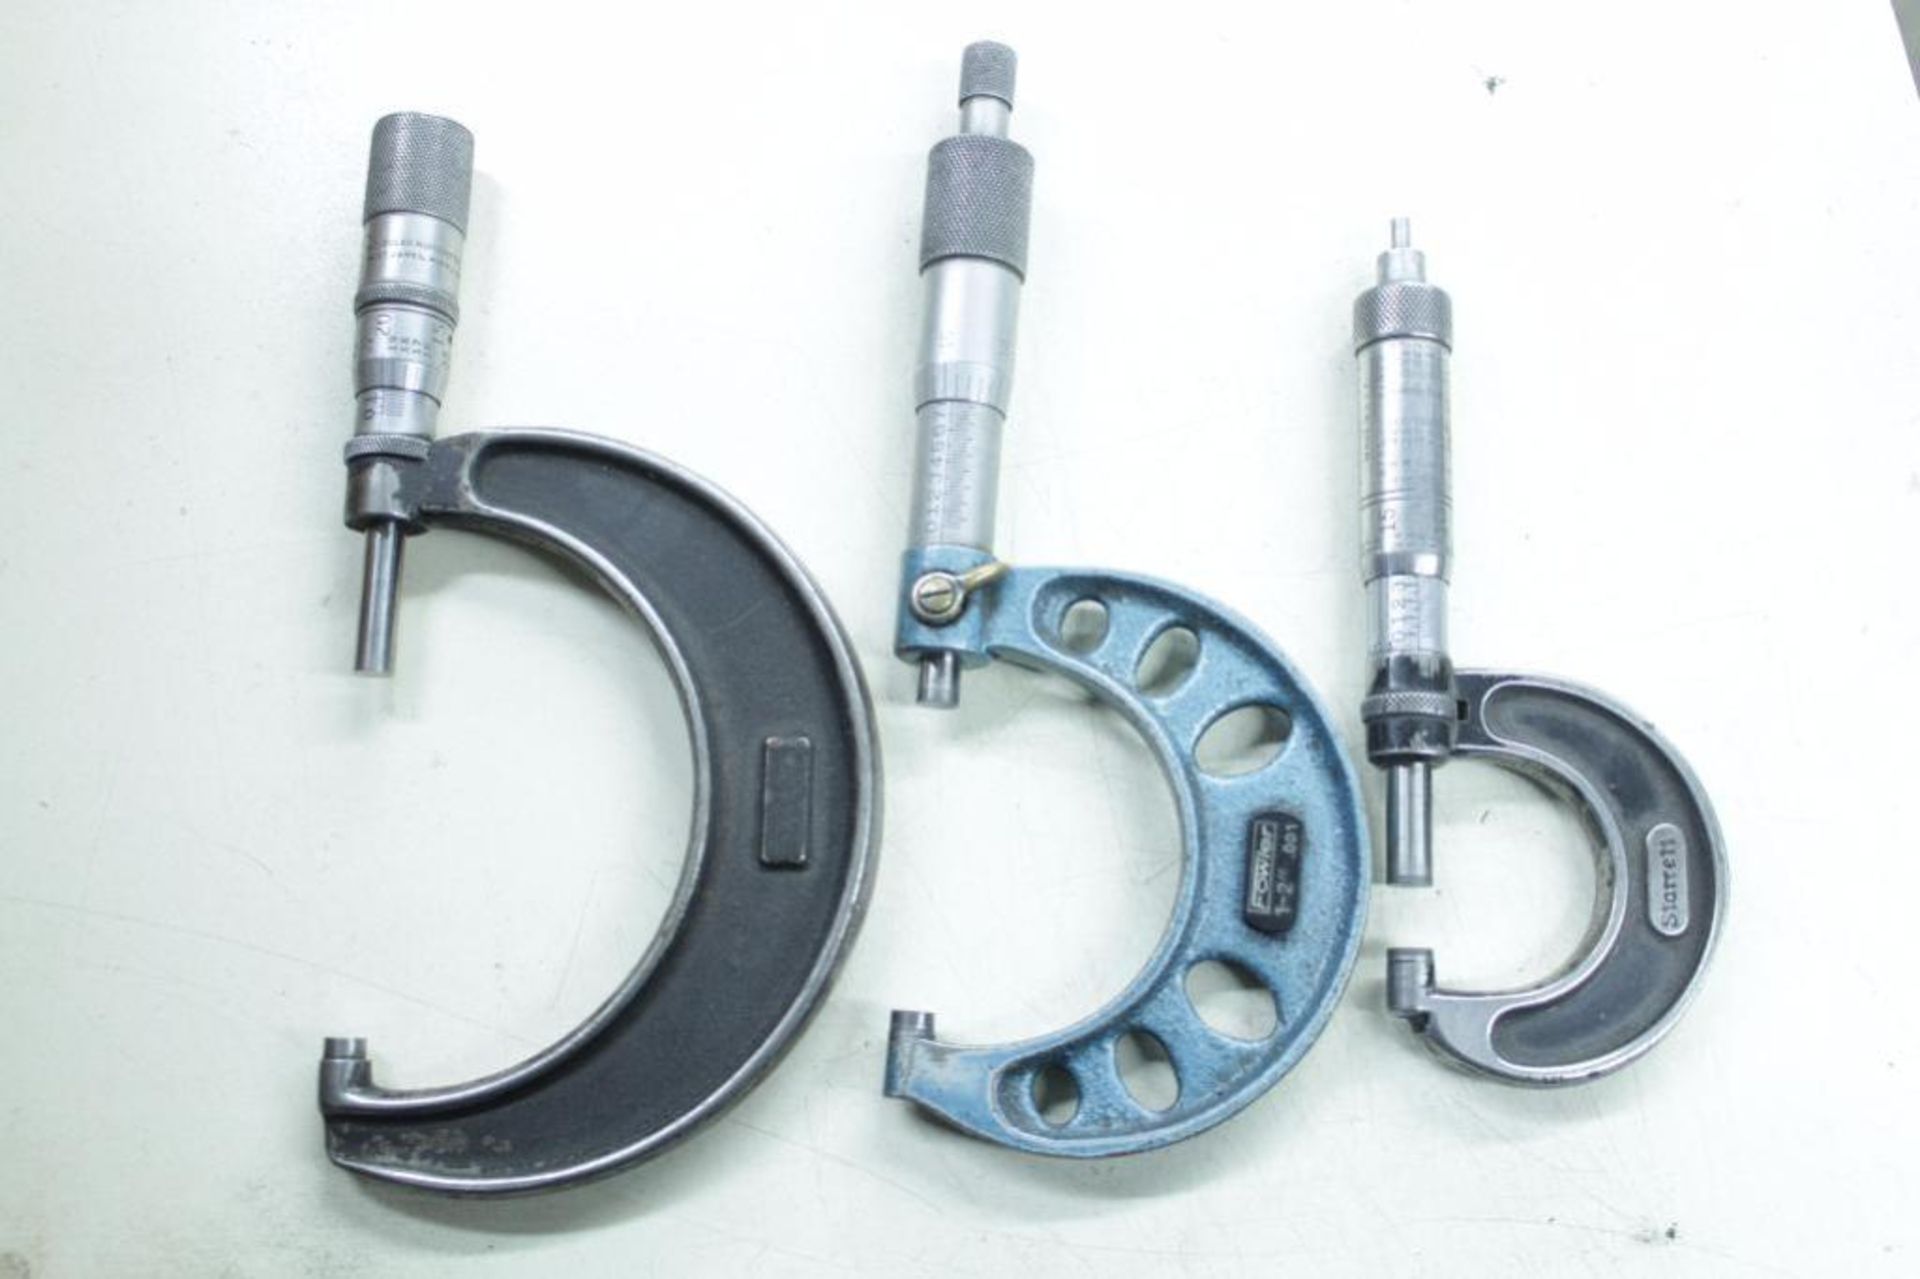 Tumico 0-6" micrometer set. 0-1 & 1-2 have been replaced with another brand micrometer - Image 5 of 5